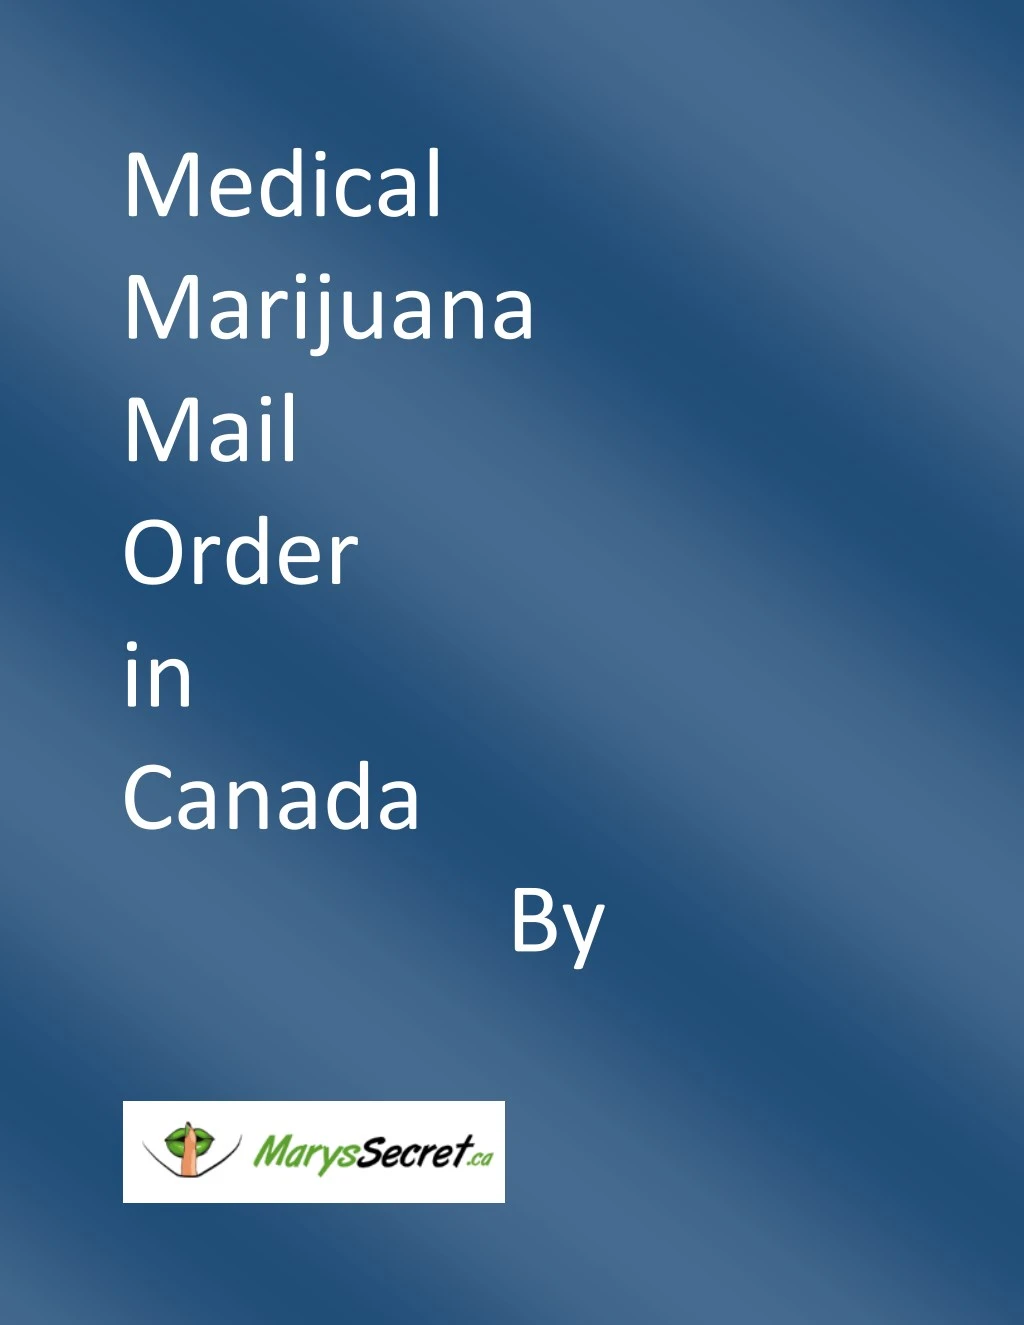 medical marijuana mail order in canada by